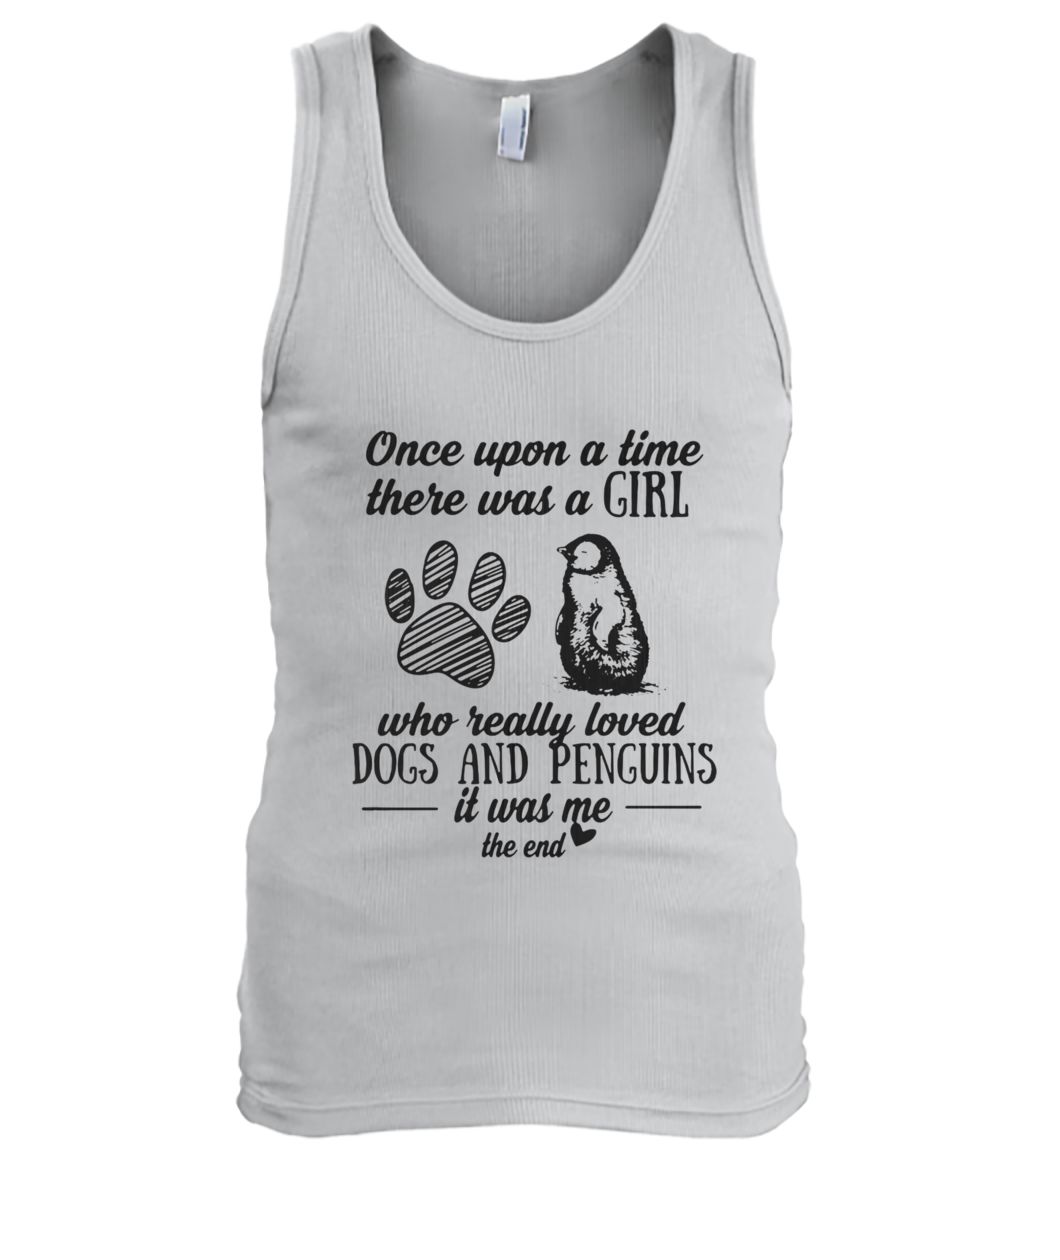 Once upon a time there was a girl who really loved dogs and penguins it was me the end men's tank top